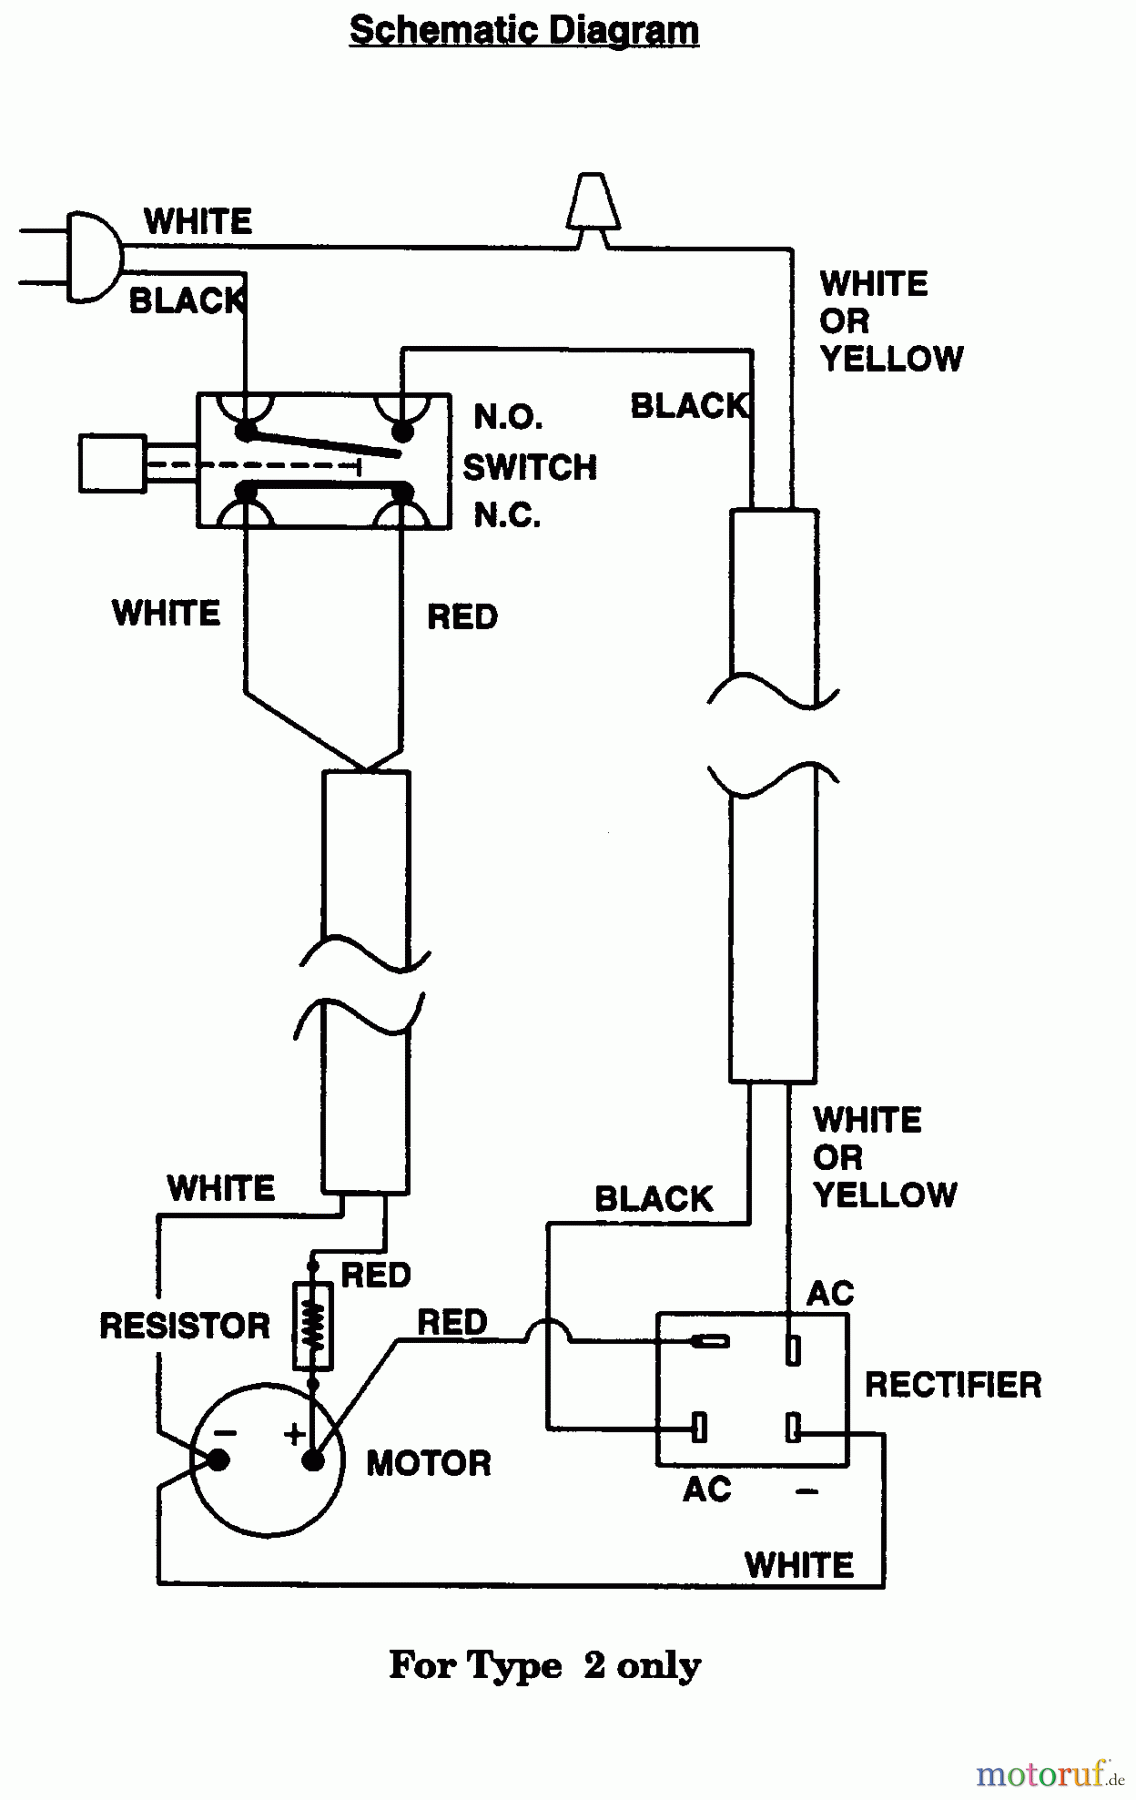  Poulan / Weed Eater Kantenschneider E125BT - Weed Eater Electric Edger SCHEMATIC DIAGRAM - TYPE 2 ONLY